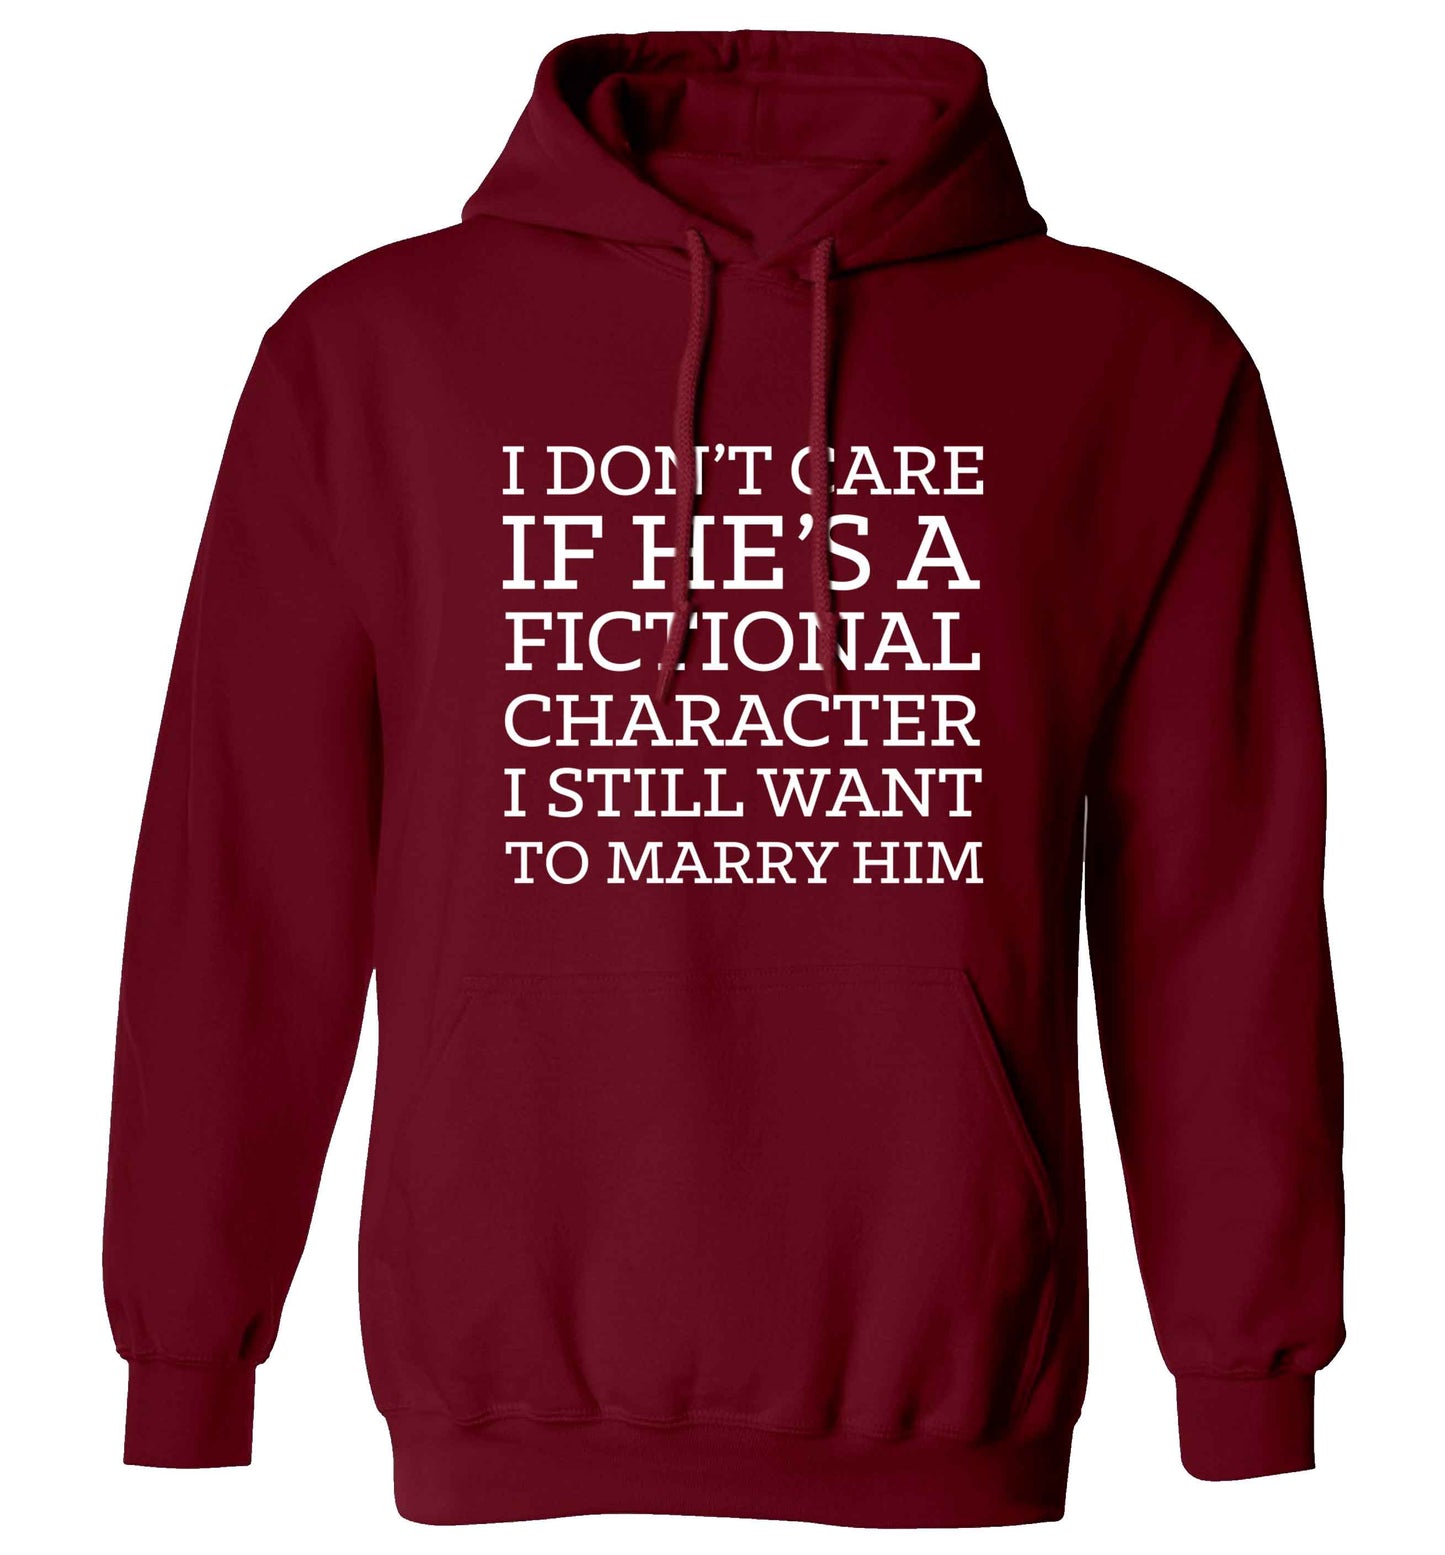 I don't care if he's a fictional character I still want to marry him adults unisex maroon hoodie 2XL